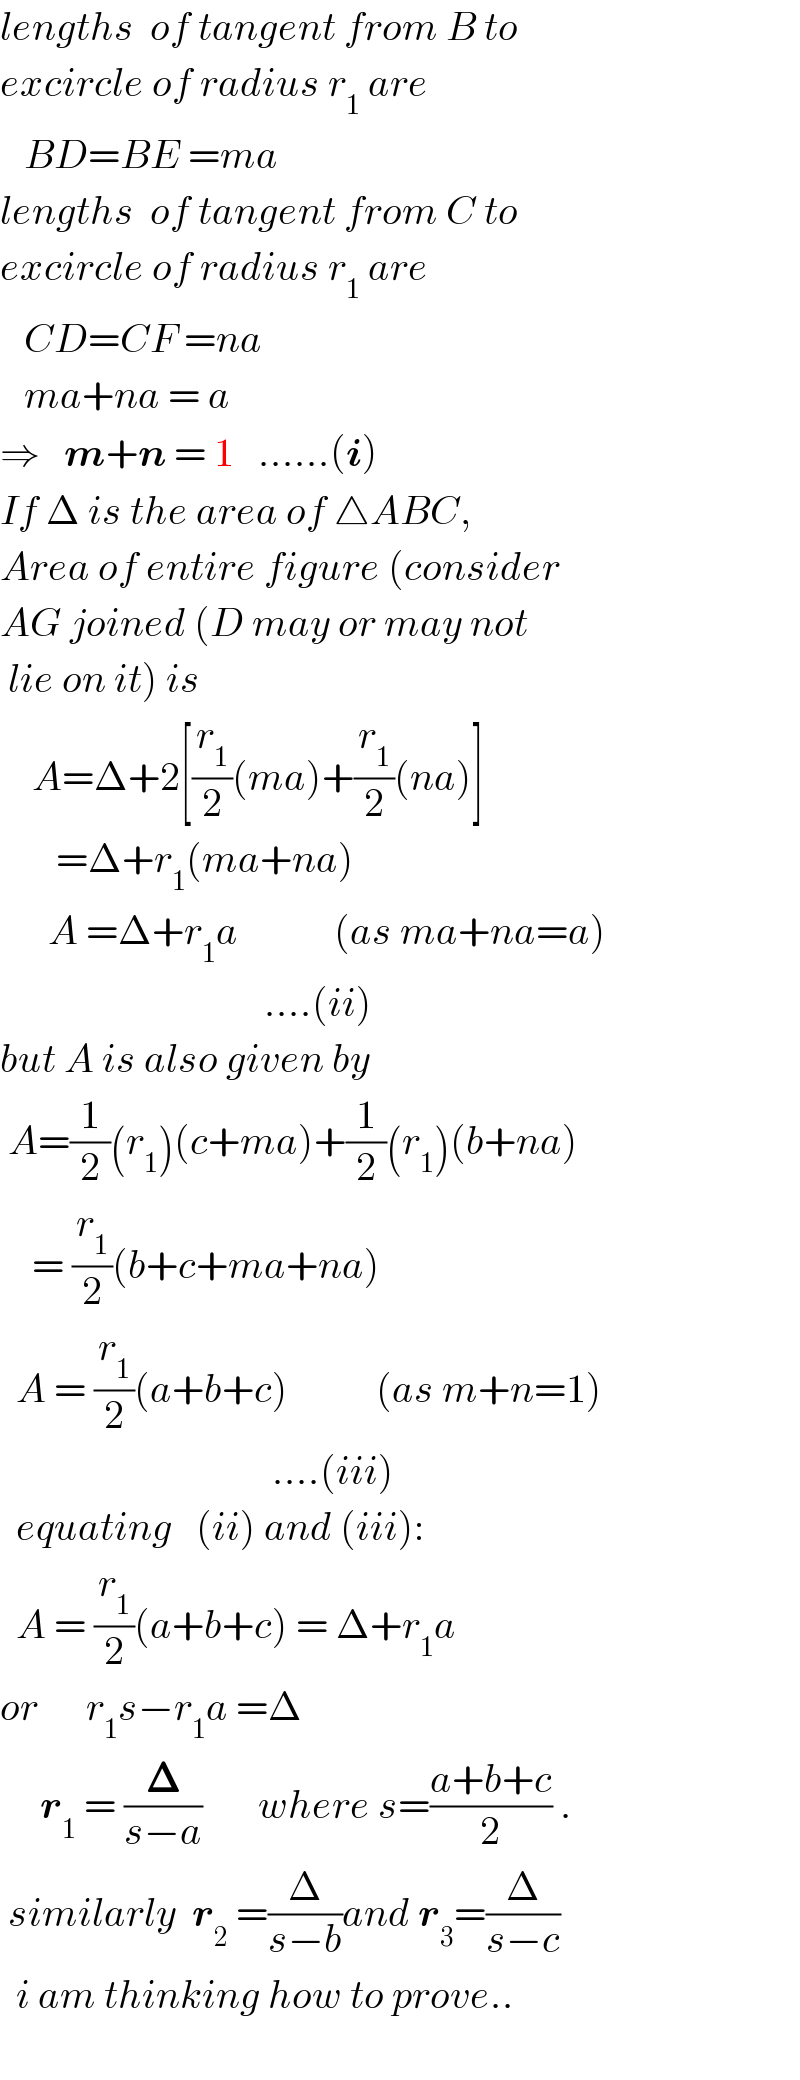 lengths  of tangent from B to  excircle of radius r_1  are     BD=BE =ma   lengths  of tangent from C to  excircle of radius r_1  are     CD=CF =na     ma+na = a  ⇒   m+n = 1   ......(i)  If Δ is the area of △ABC,  Area of entire figure (consider  AG joined (D may or may not   lie on it) is      A=Δ+2[(r_1 /2)(ma)+(r_1 /2)(na)]         =Δ+r_1 (ma+na)         A =Δ+r_1 a            (as ma+na=a)                                   ....(ii)  but A is also given by   A=(1/2)(r_1 )(c+ma)+(1/2)(r_1 )(b+na)      = (r_1 /2)(b+c+ma+na)    A = (r_1 /2)(a+b+c)           (as m+n=1)                                    ....(iii)    equating   (ii) and (iii):    A = (r_1 /2)(a+b+c) = Δ+r_1 a  or      r_1 s−r_1 a =Δ       r_1  = (𝚫/(s−a))       where s=((a+b+c)/2) .   similarly  r_2  =(Δ/(s−b))and r_3 =(Δ/(s−c))    i am thinking how to prove..    